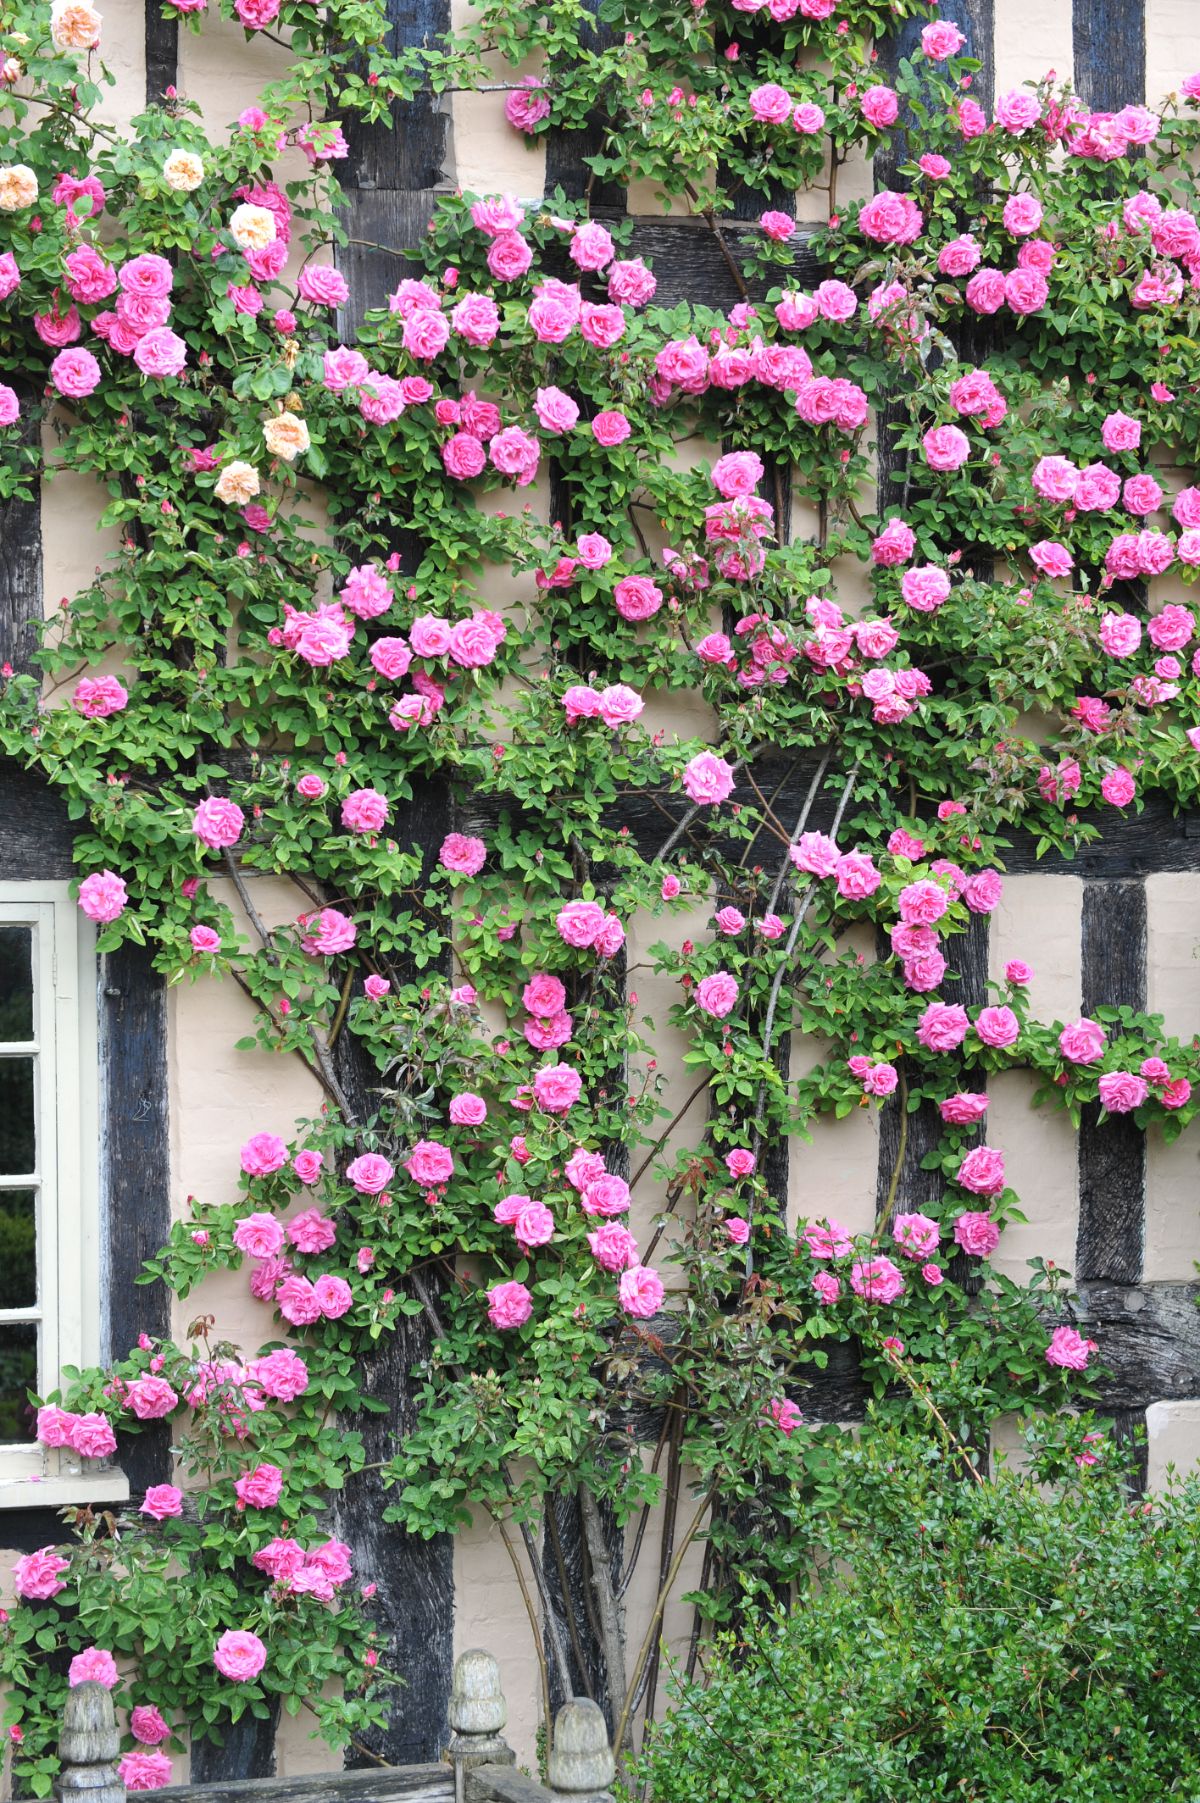 Pink Zephirine Drouhin rose growing against a wall